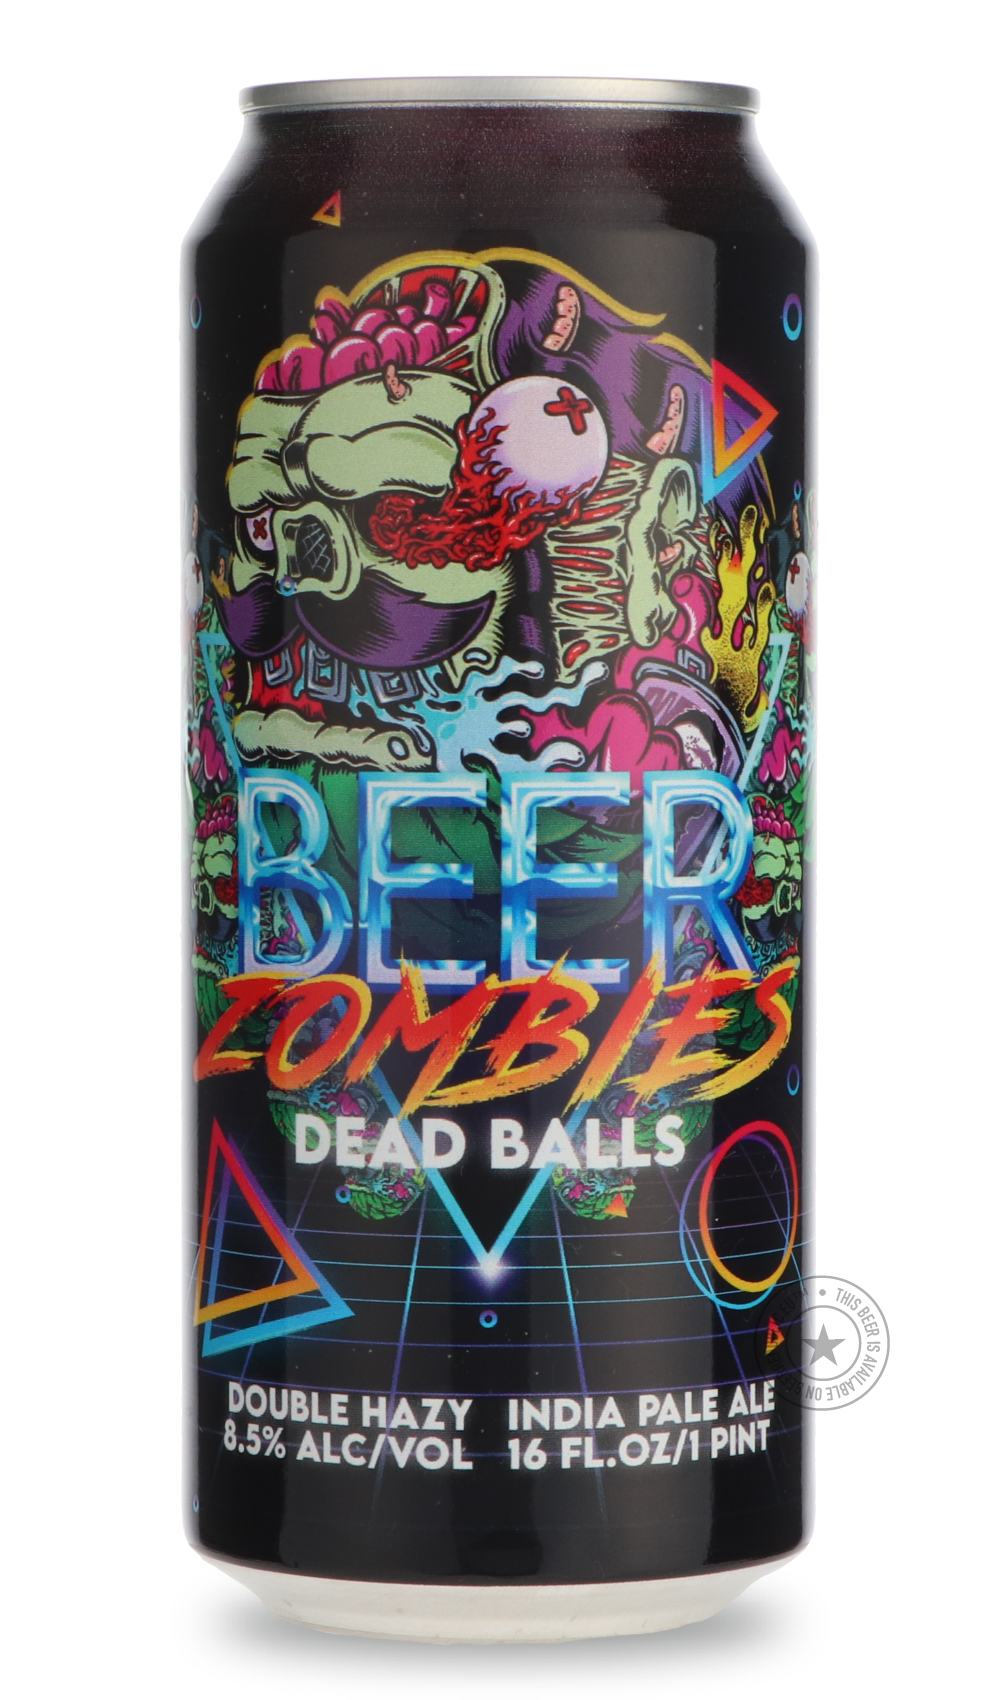 -Beer Zombies- Dead Balls-IPA- Only @ Beer Republic - The best online beer store for American & Canadian craft beer - Buy beer online from the USA and Canada - Bier online kopen - Amerikaans bier kopen - Craft beer store - Craft beer kopen - Amerikanisch bier kaufen - Bier online kaufen - Acheter biere online - IPA - Stout - Porter - New England IPA - Hazy IPA - Imperial Stout - Barrel Aged - Barrel Aged Imperial Stout - Brown - Dark beer - Blond - Blonde - Pilsner - Lager - Wheat - Weizen - Amber - Barley 